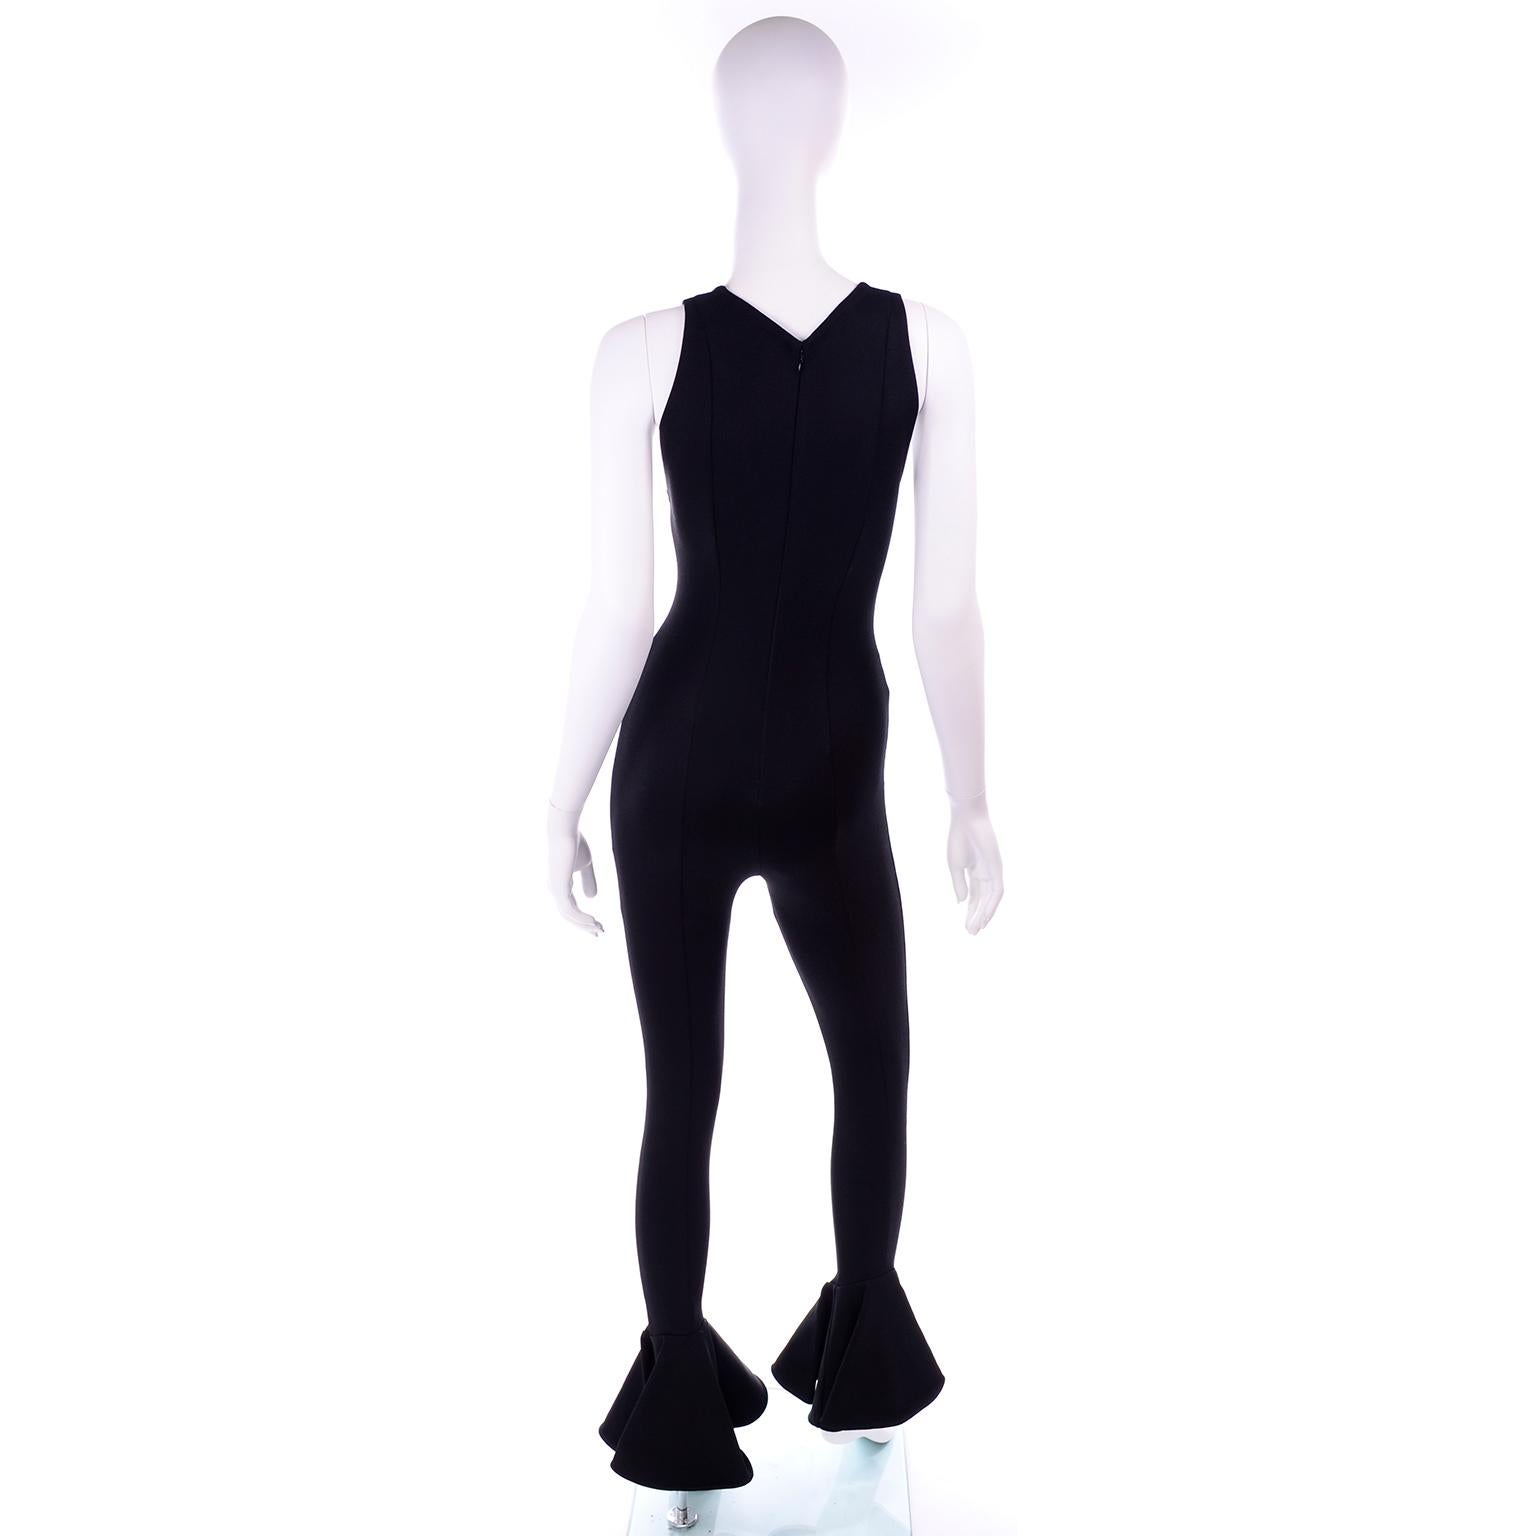 Women's Documented 1993 Gianni Versace Couture Vintage Black Runway Ruffled Hem Jumpsuit For Sale